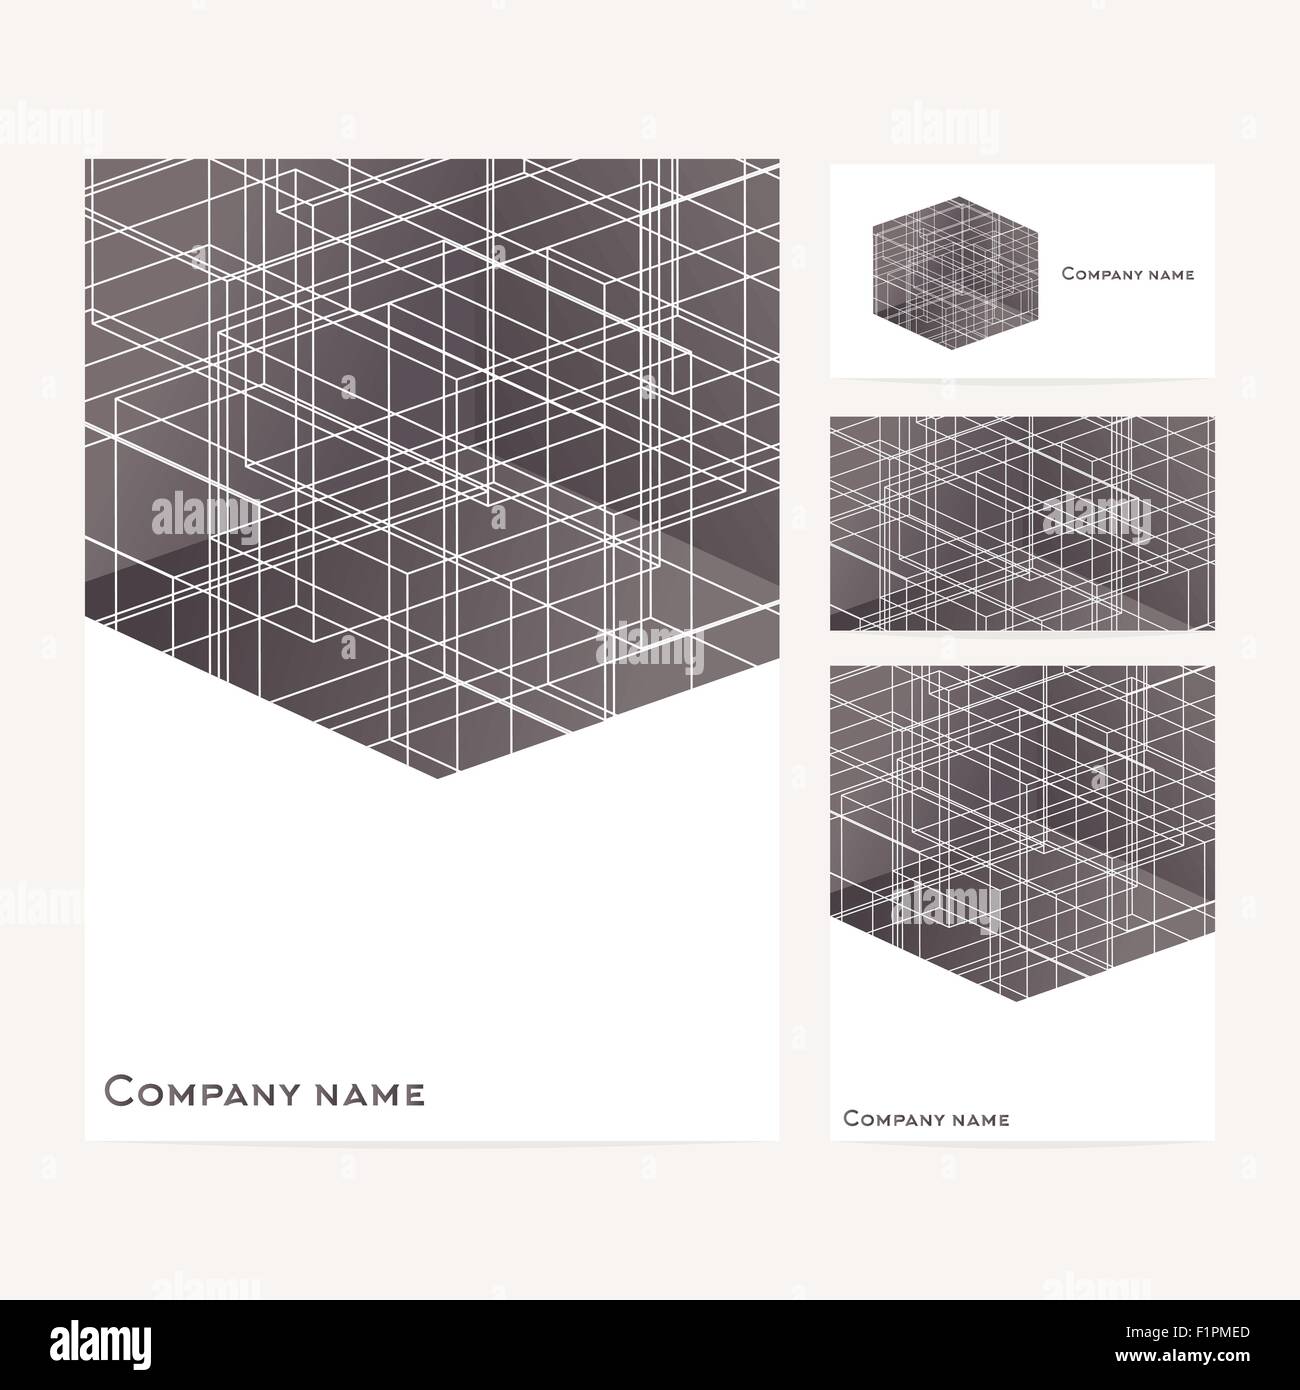 Stationery template design with square elements and white lines Vector illustration Stock Vector